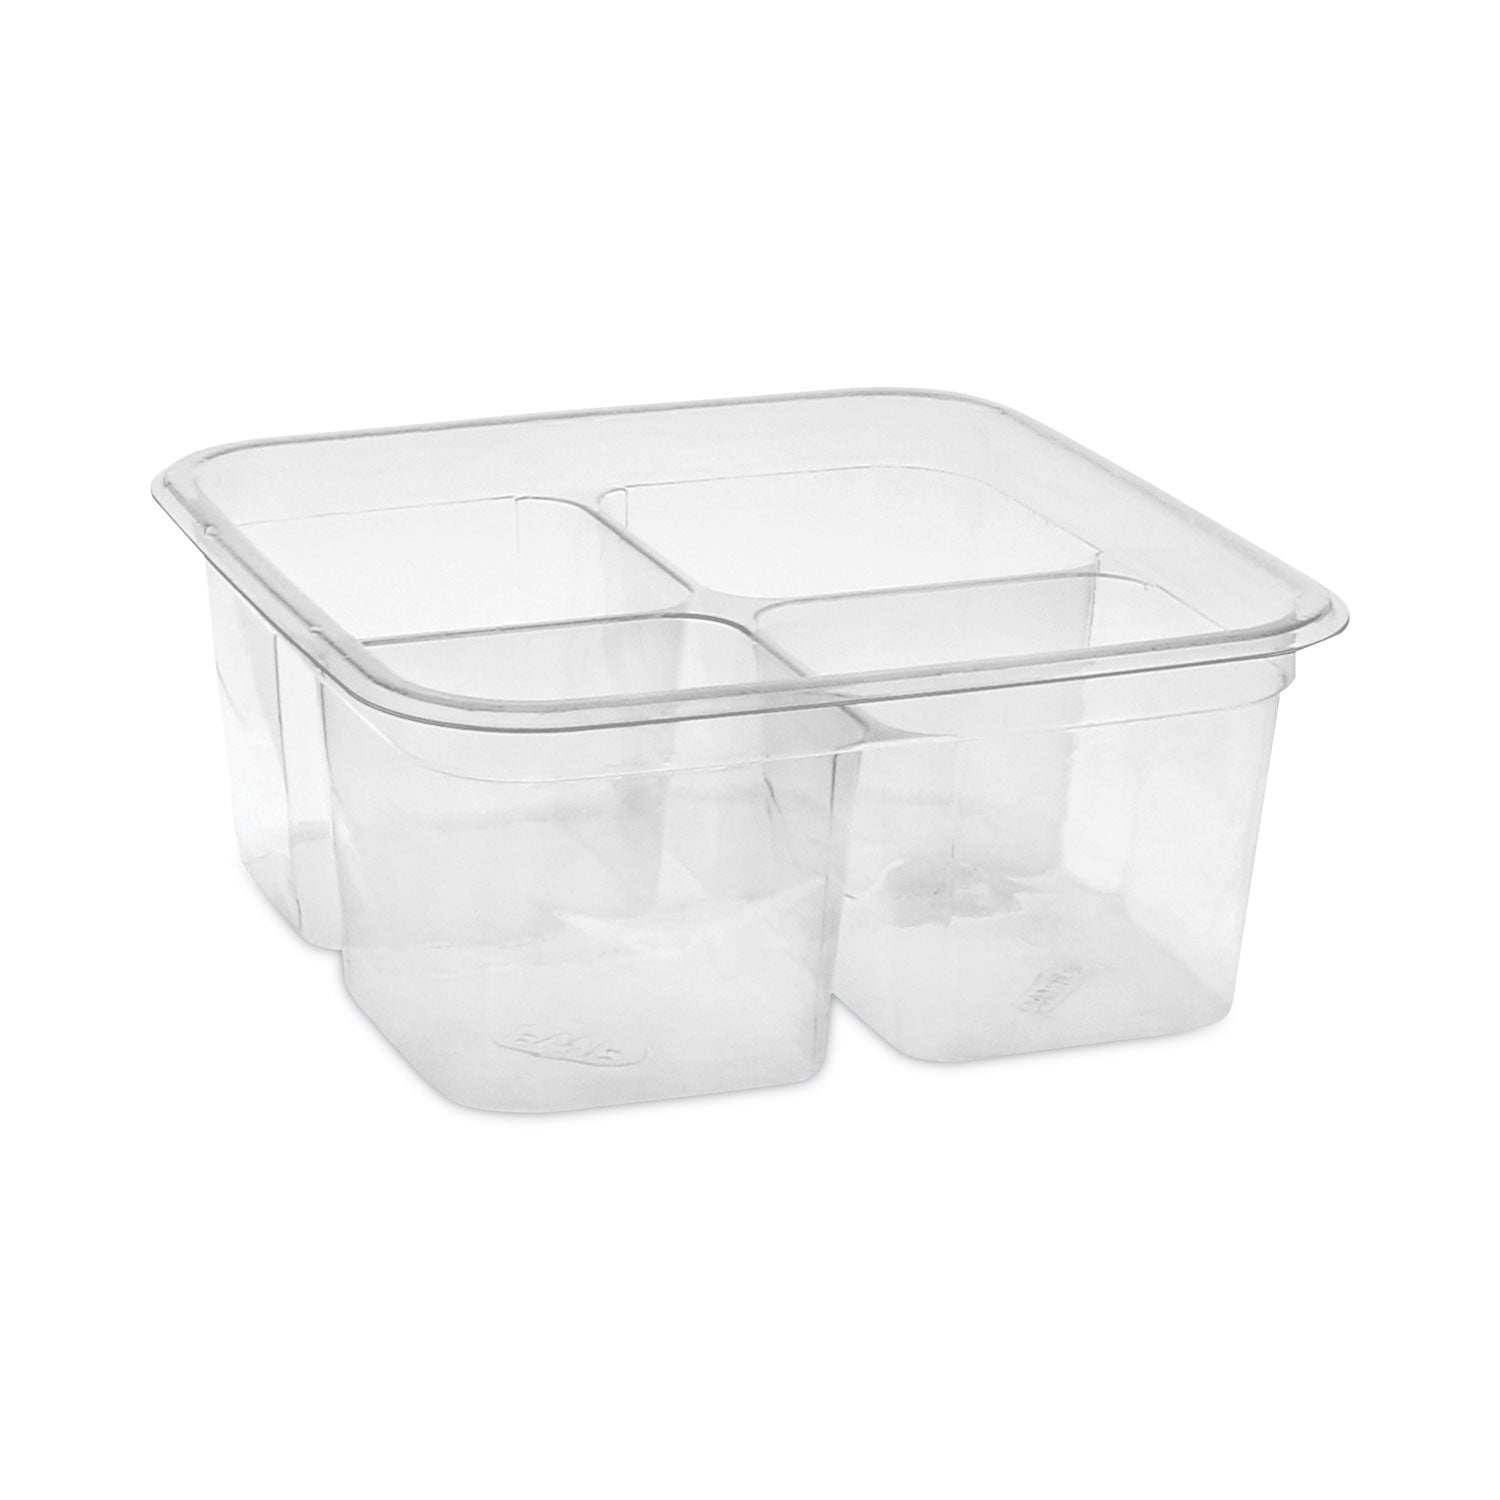 earthchoice-square-recycled-bowl4-compartment-32-oz-613-x-613-x-261-clear-plastic-360-carton_pcty6s324c - 1